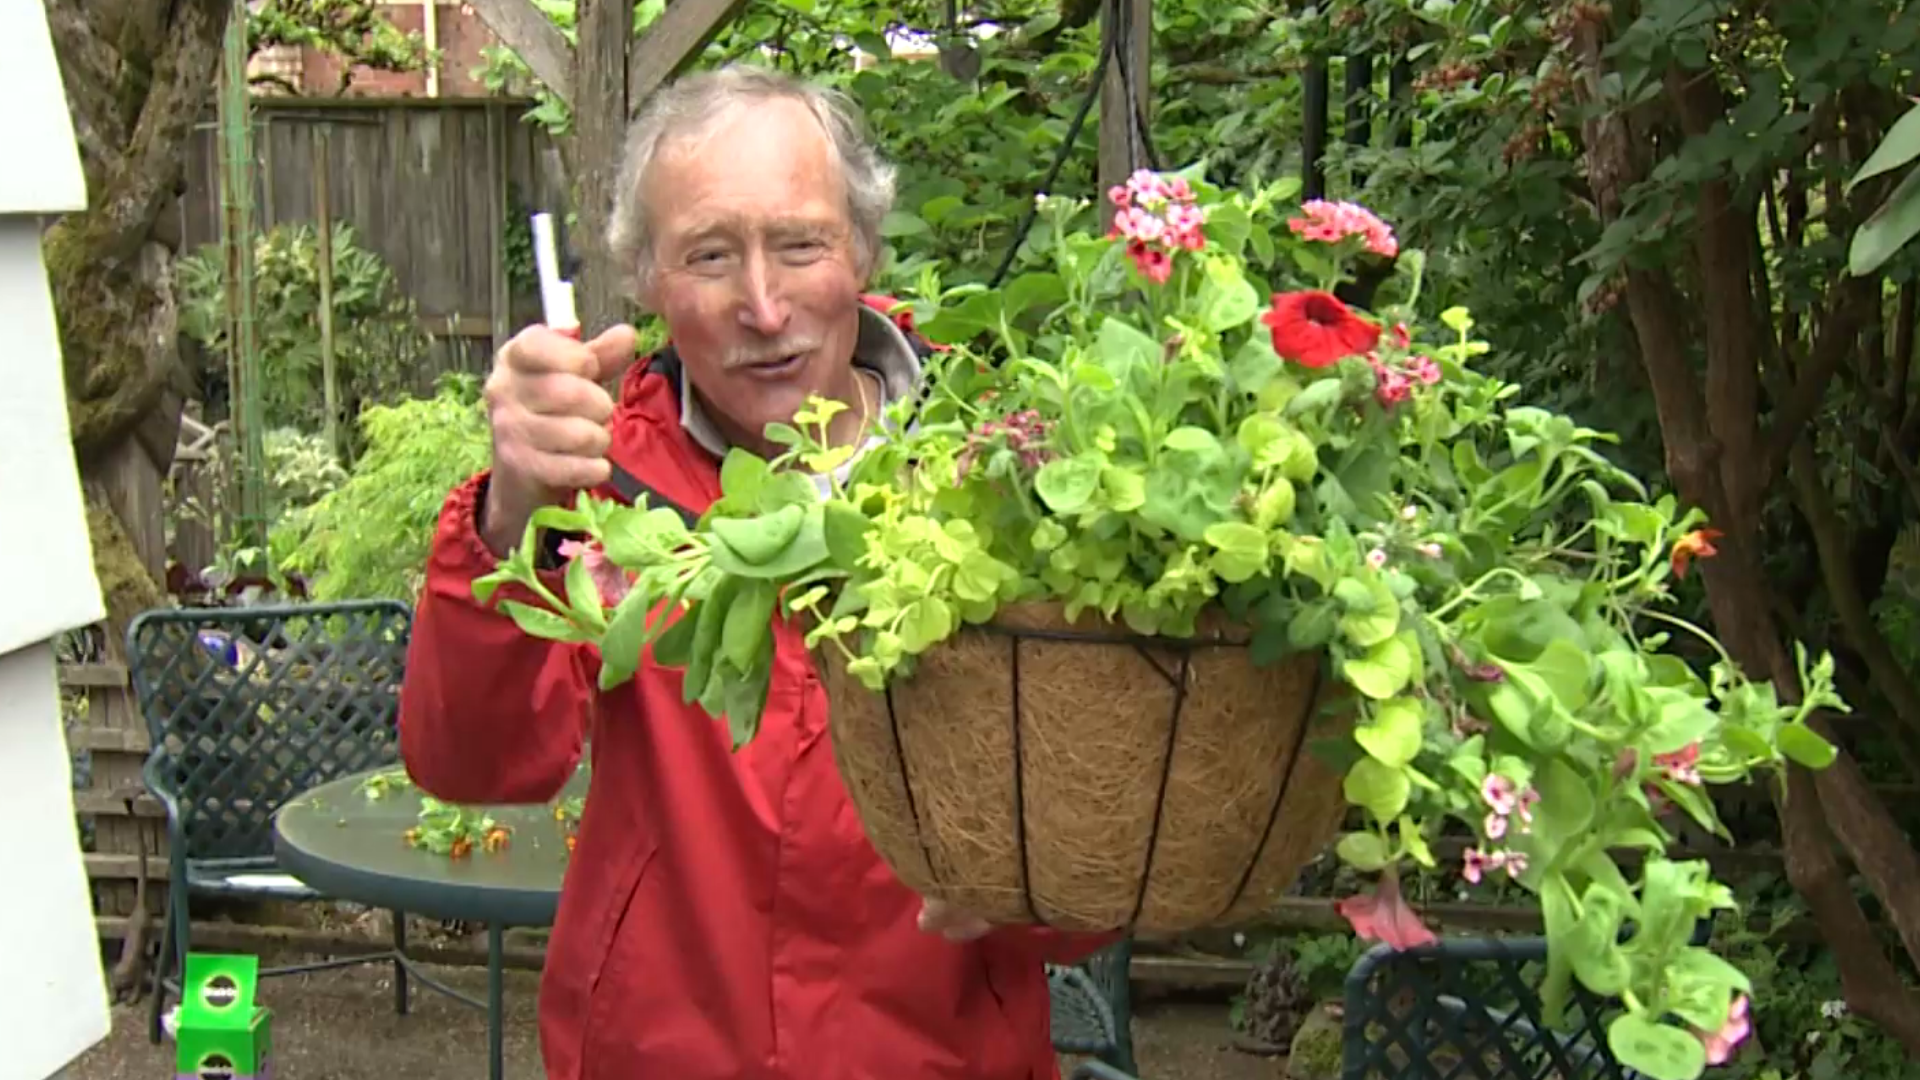 Ciscoe Morris on how to save the fading flowers you got for Mother's Day. Sponsored by Dramm